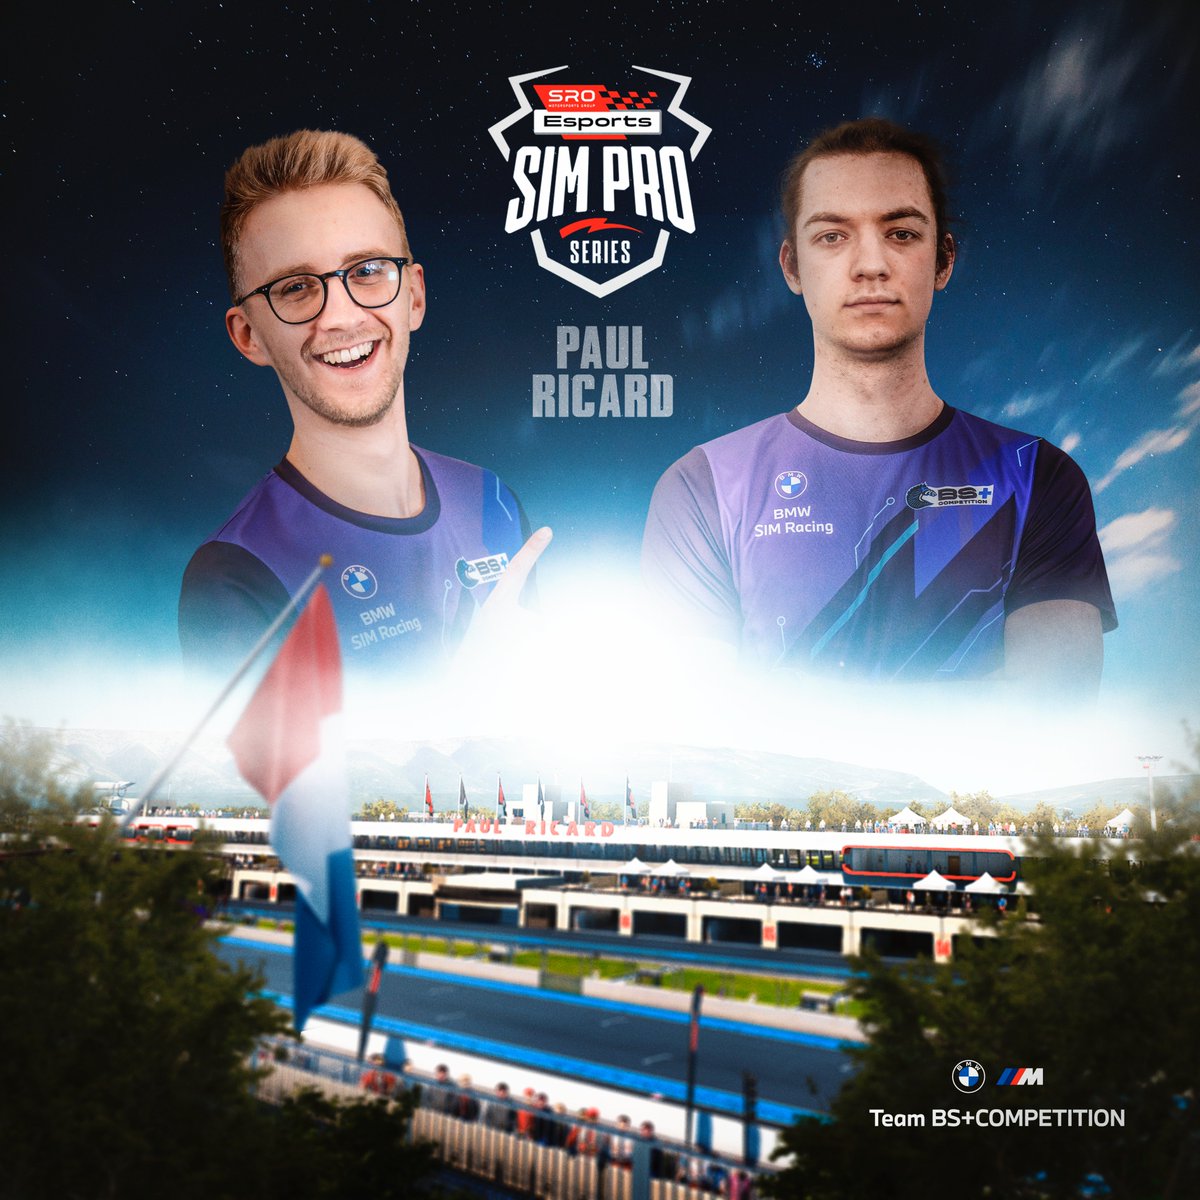 The second race of the #SROEsports #SimProSeries will see @ArthurKammerer & @GregorSch5 competing at Paul Ricard 🇫🇷.

There's nothing more exciting than having all participants in an on-site location, fighting for the 🏁

Live from 21:05 CEST, let's go 🦓